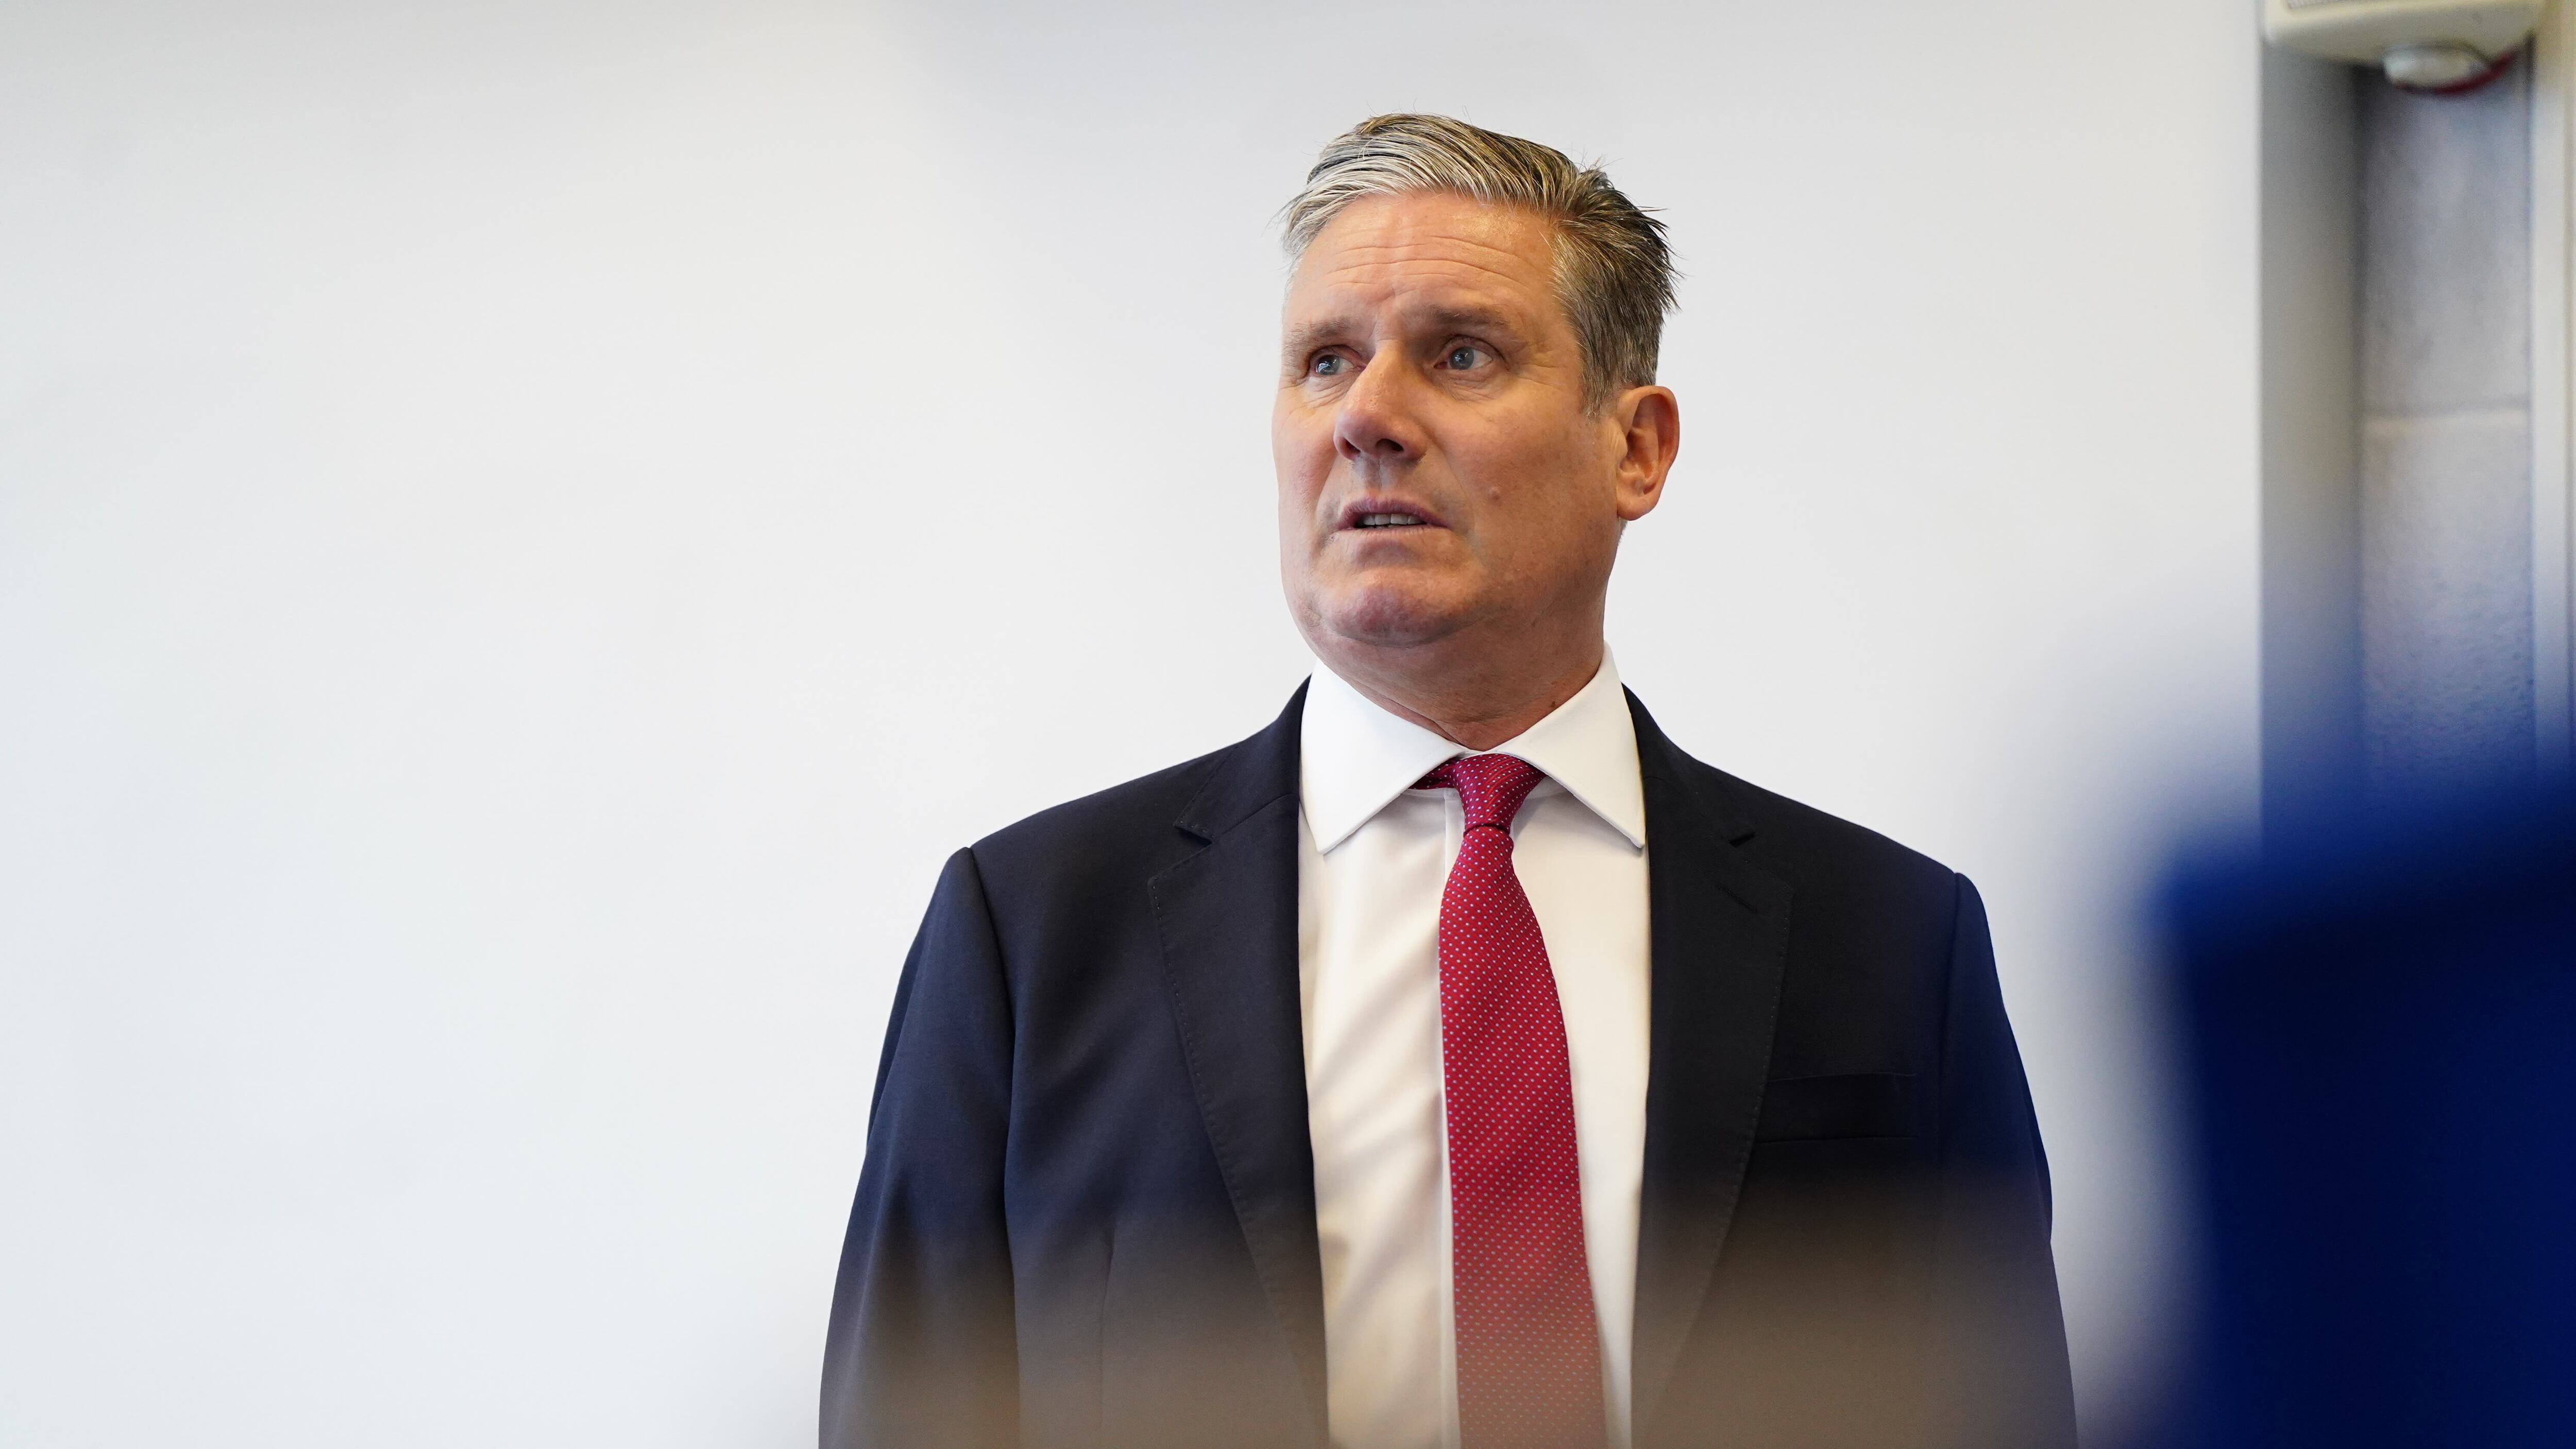 Labour leader Sir Keir Starmer has been urged to back cost-of-living measures ahead of the autumn statement (James Manning/PA)